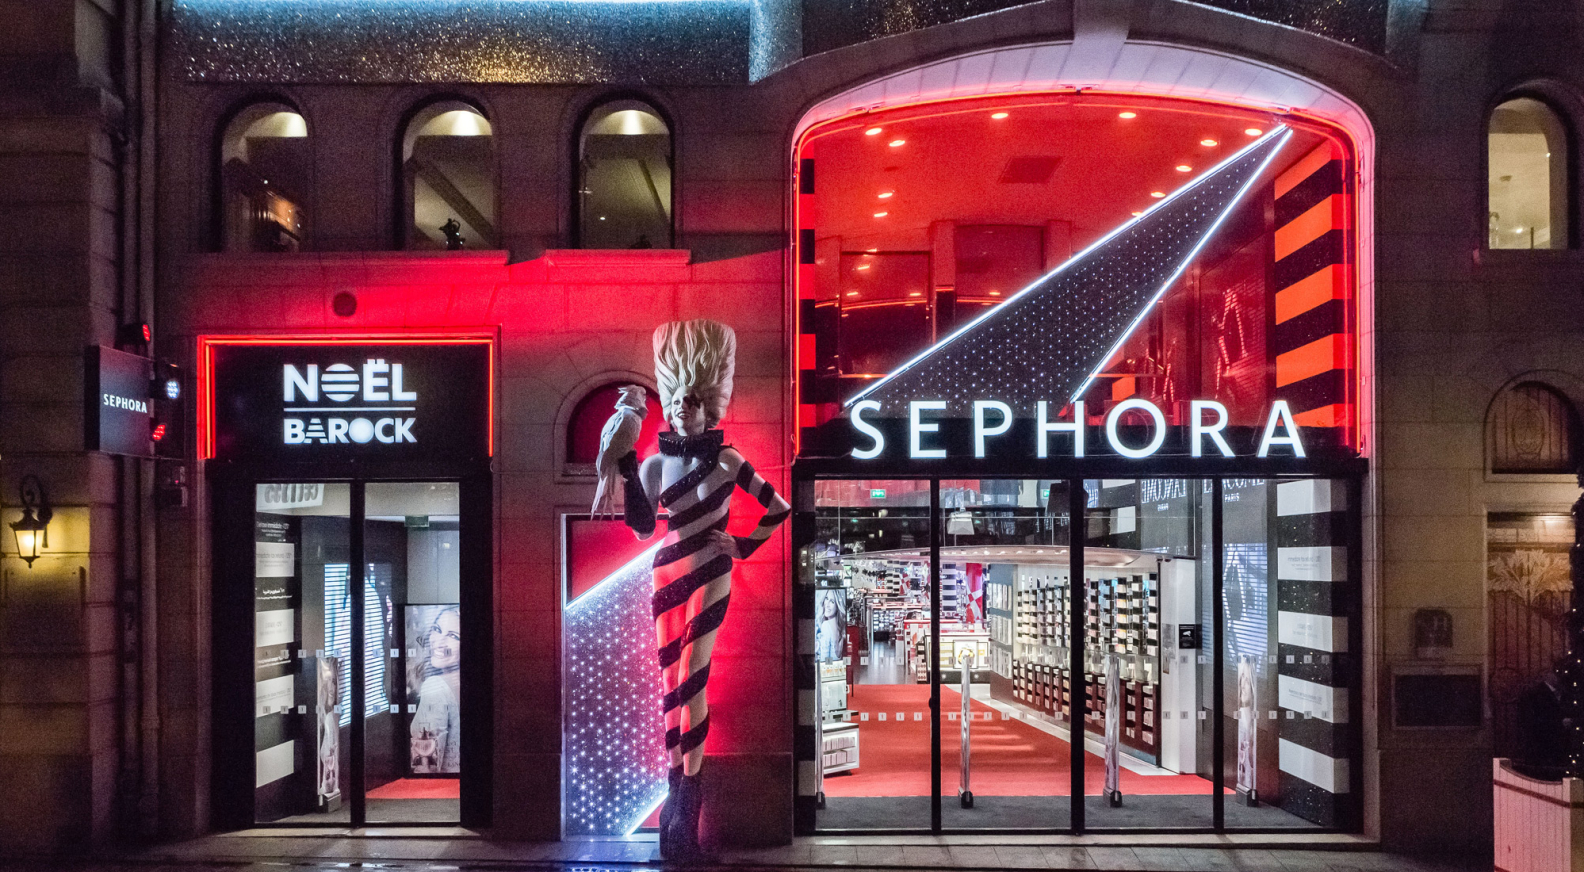 Holiday spirit abounds at Sephora stores - LVMH